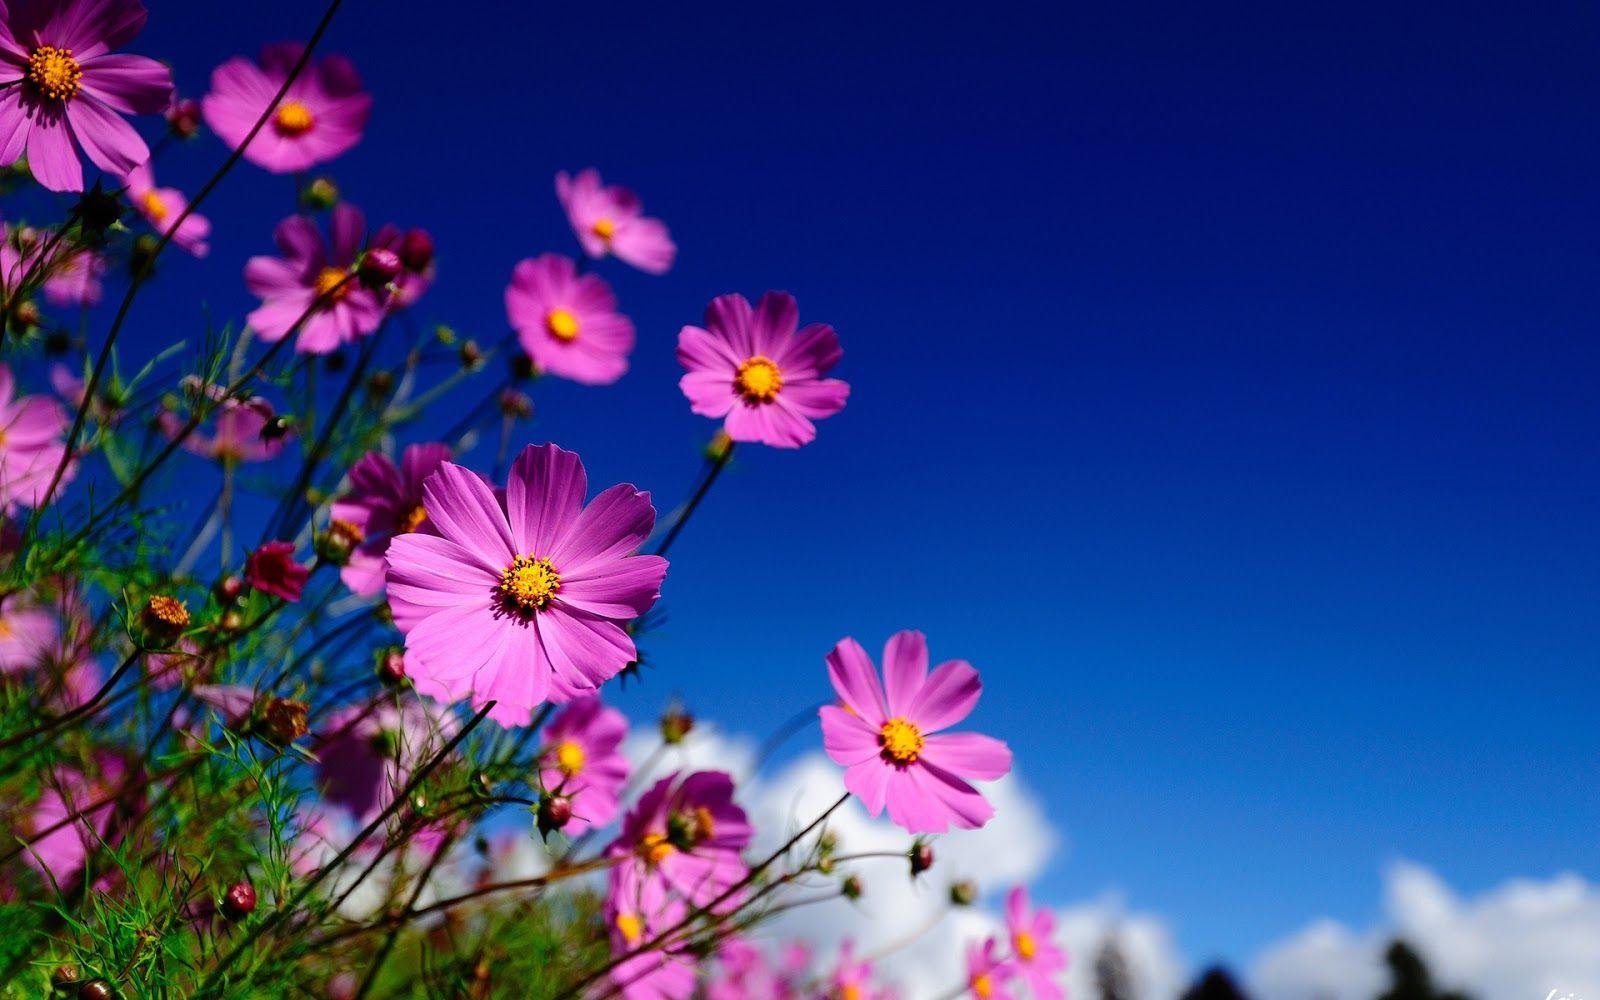 Best Wallpaper Image Flowers Background High Quality Widescreen